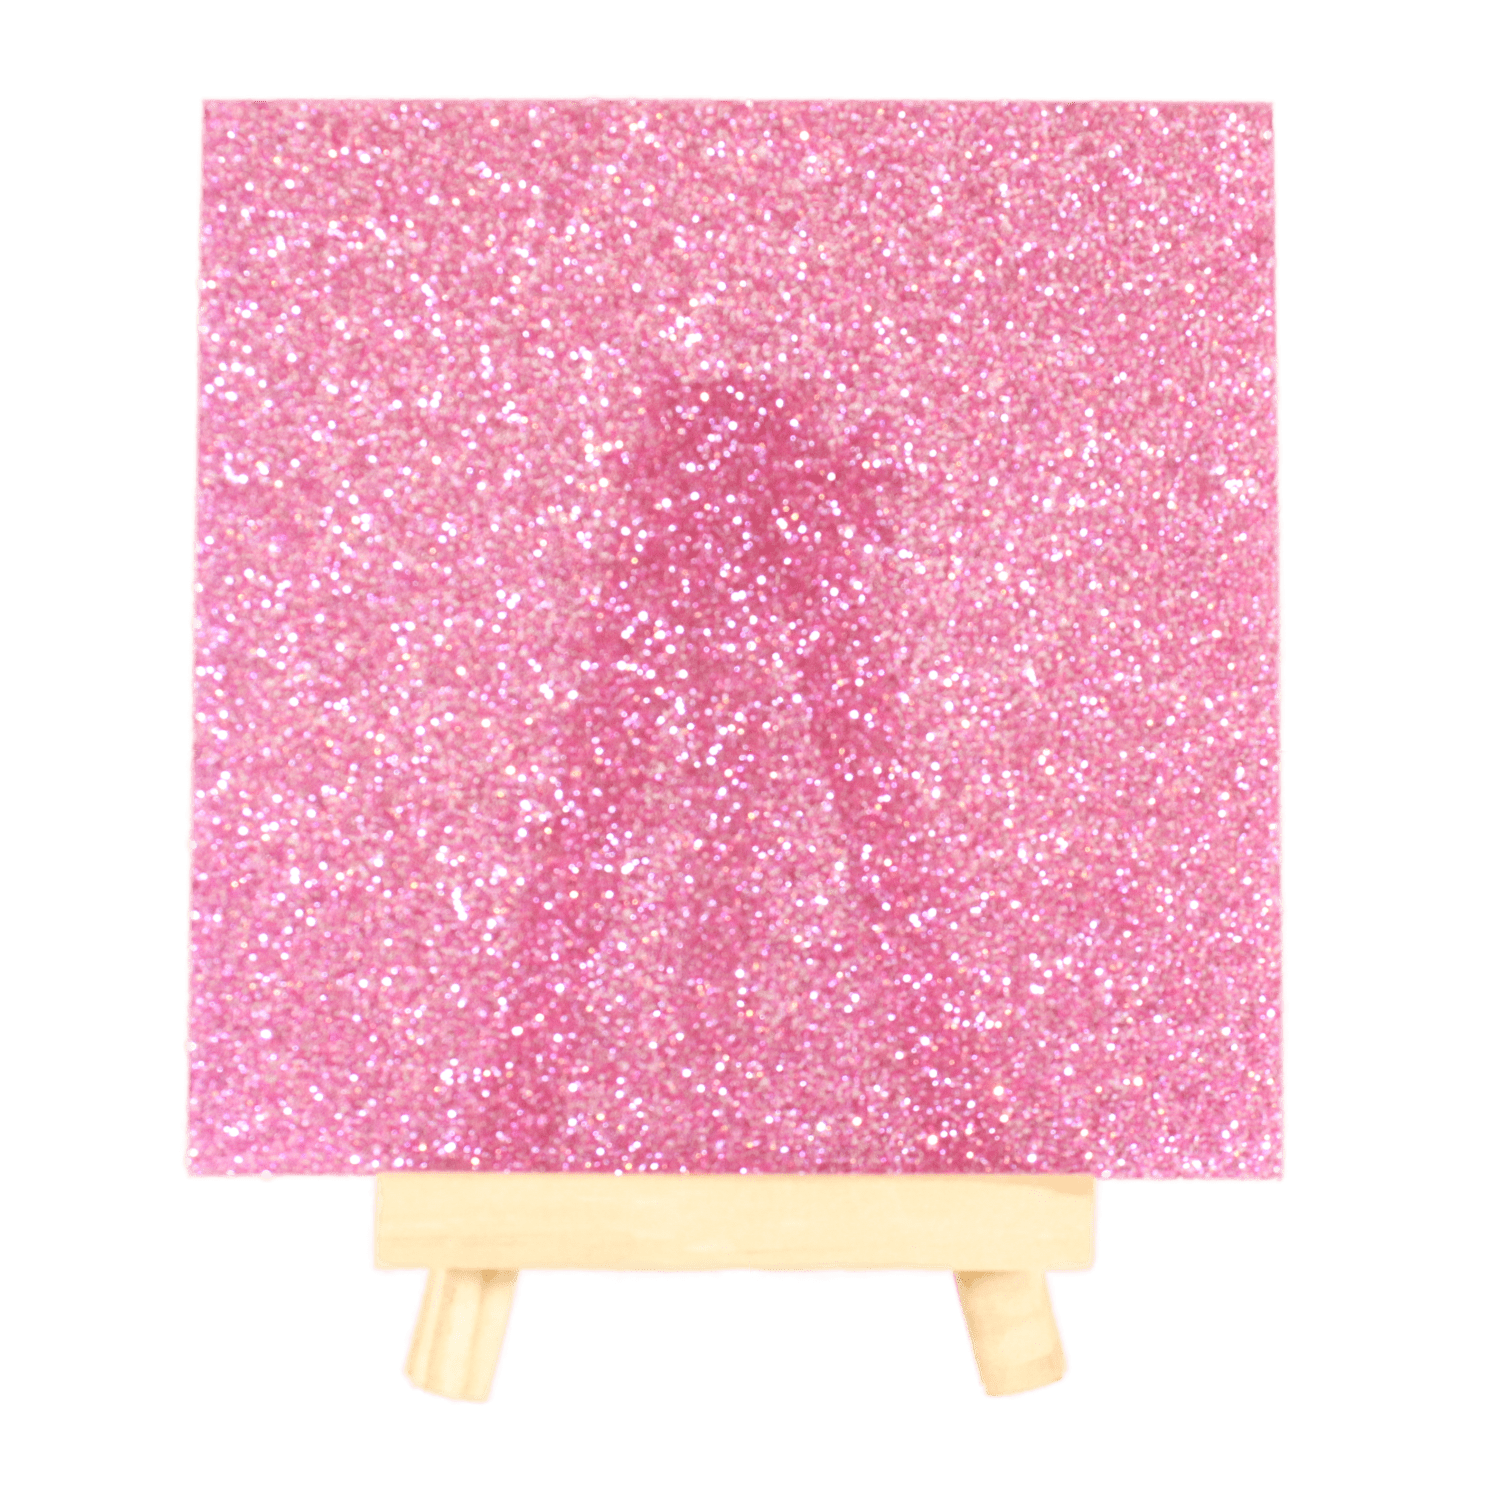 Acrylic Cast Sheet - Pink (3199) - 12 x 12 x 3 MM (0.12) Thick (Nominal)